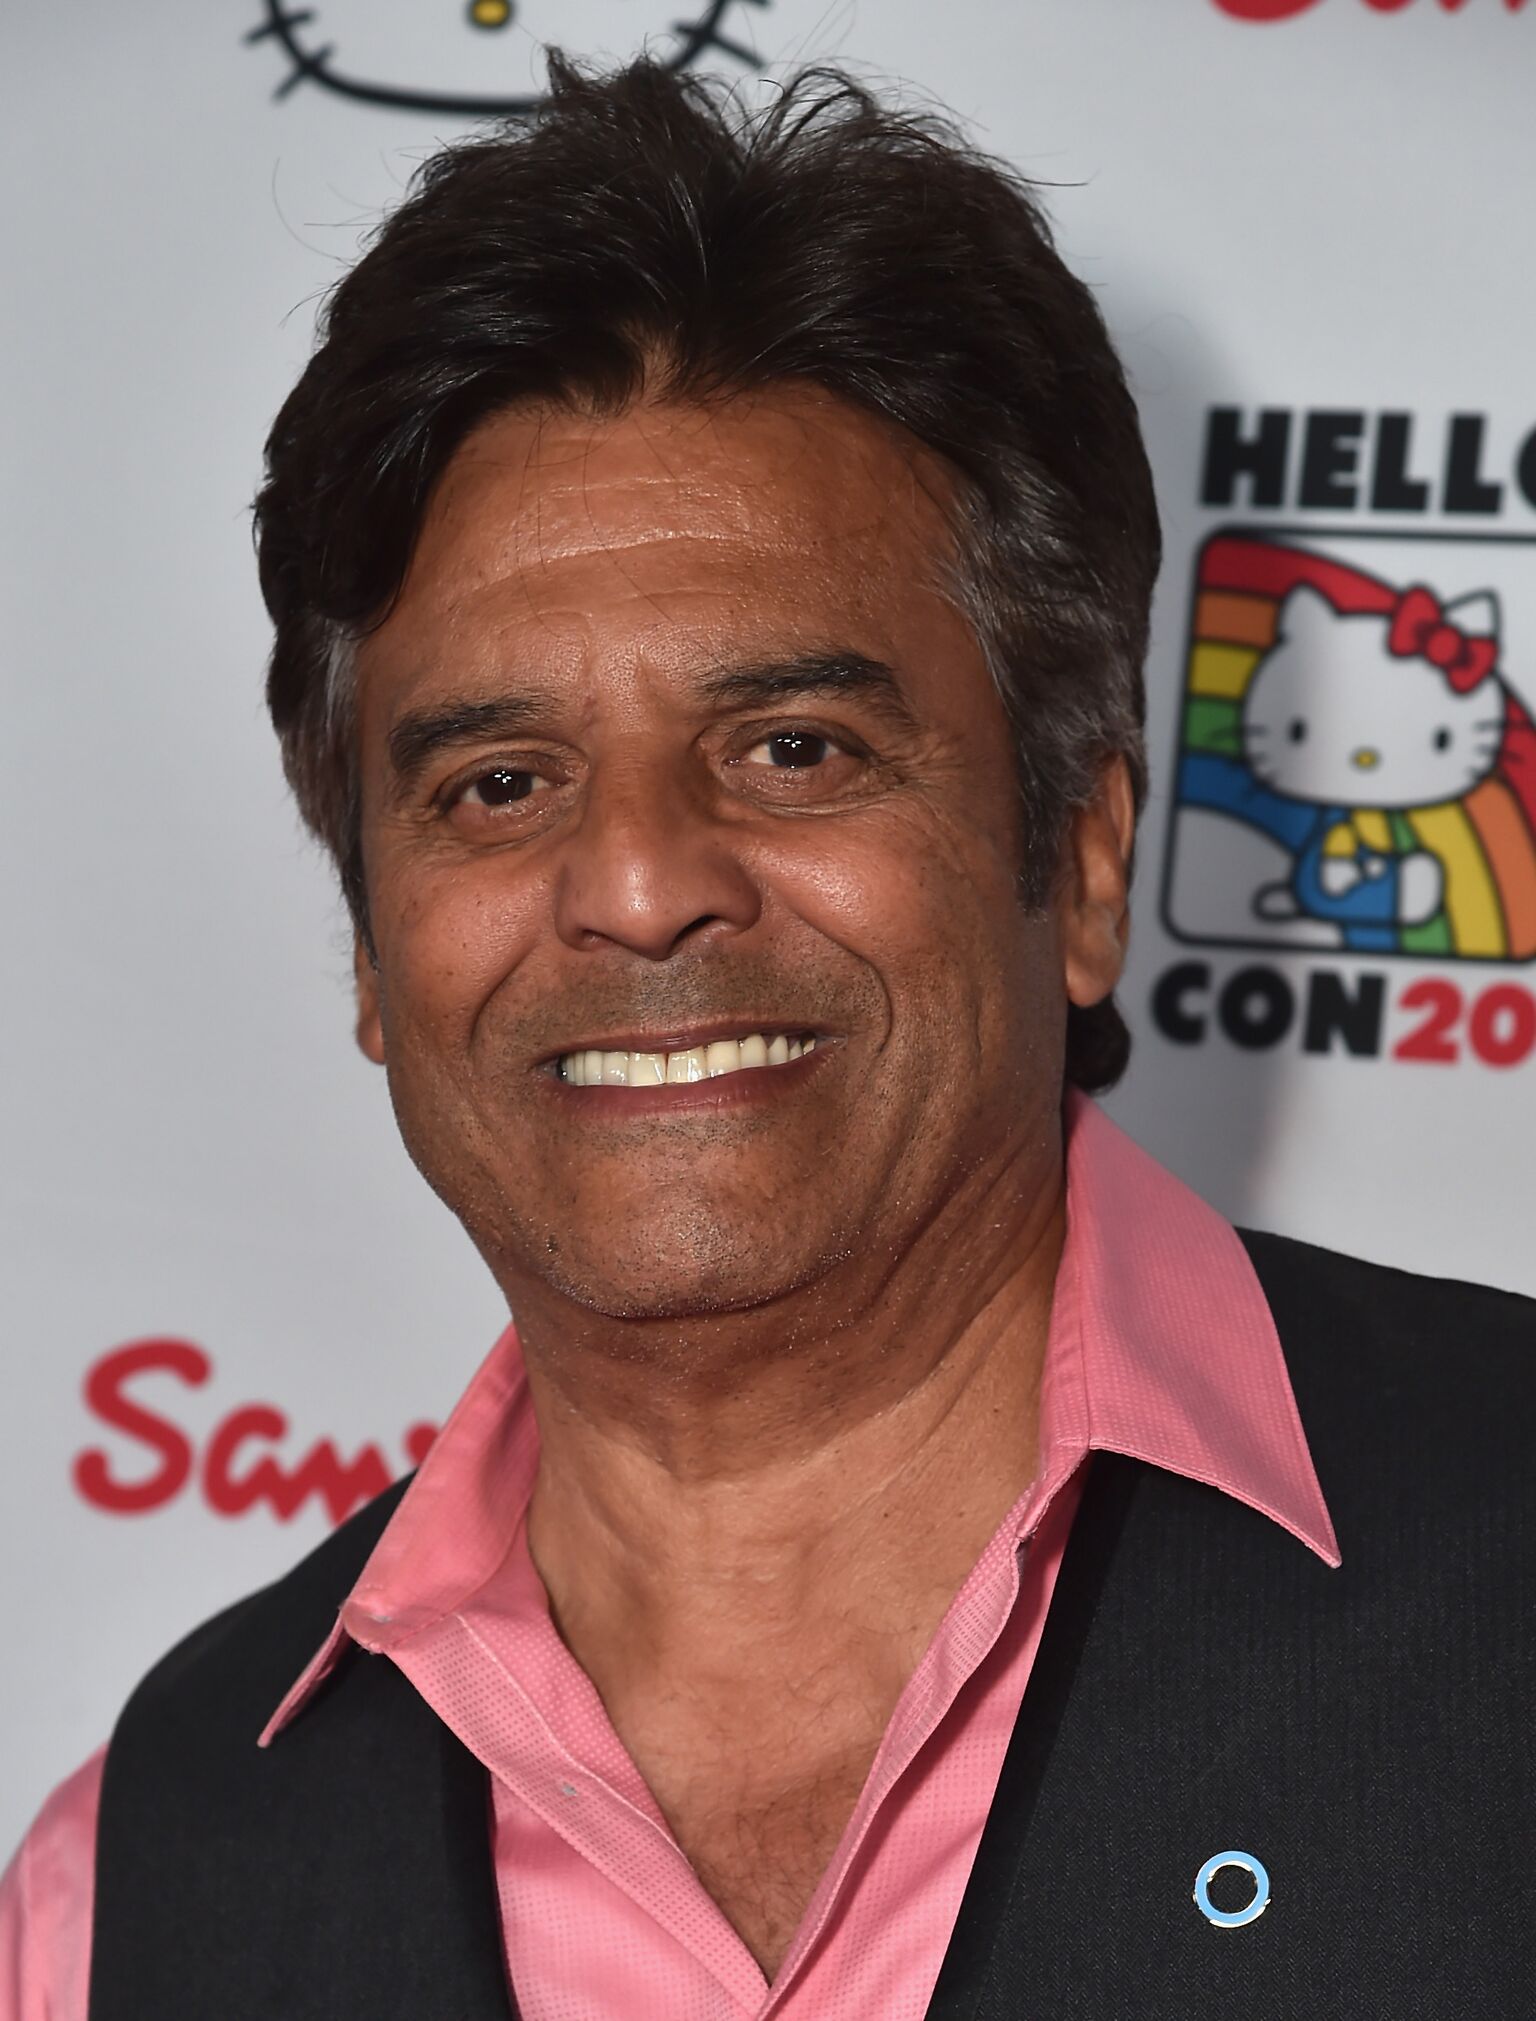 Actor Erik Estrada arrives to Hello Kitty Con 2014 Opening Night Party Co-hosted by Target  | Getty Images